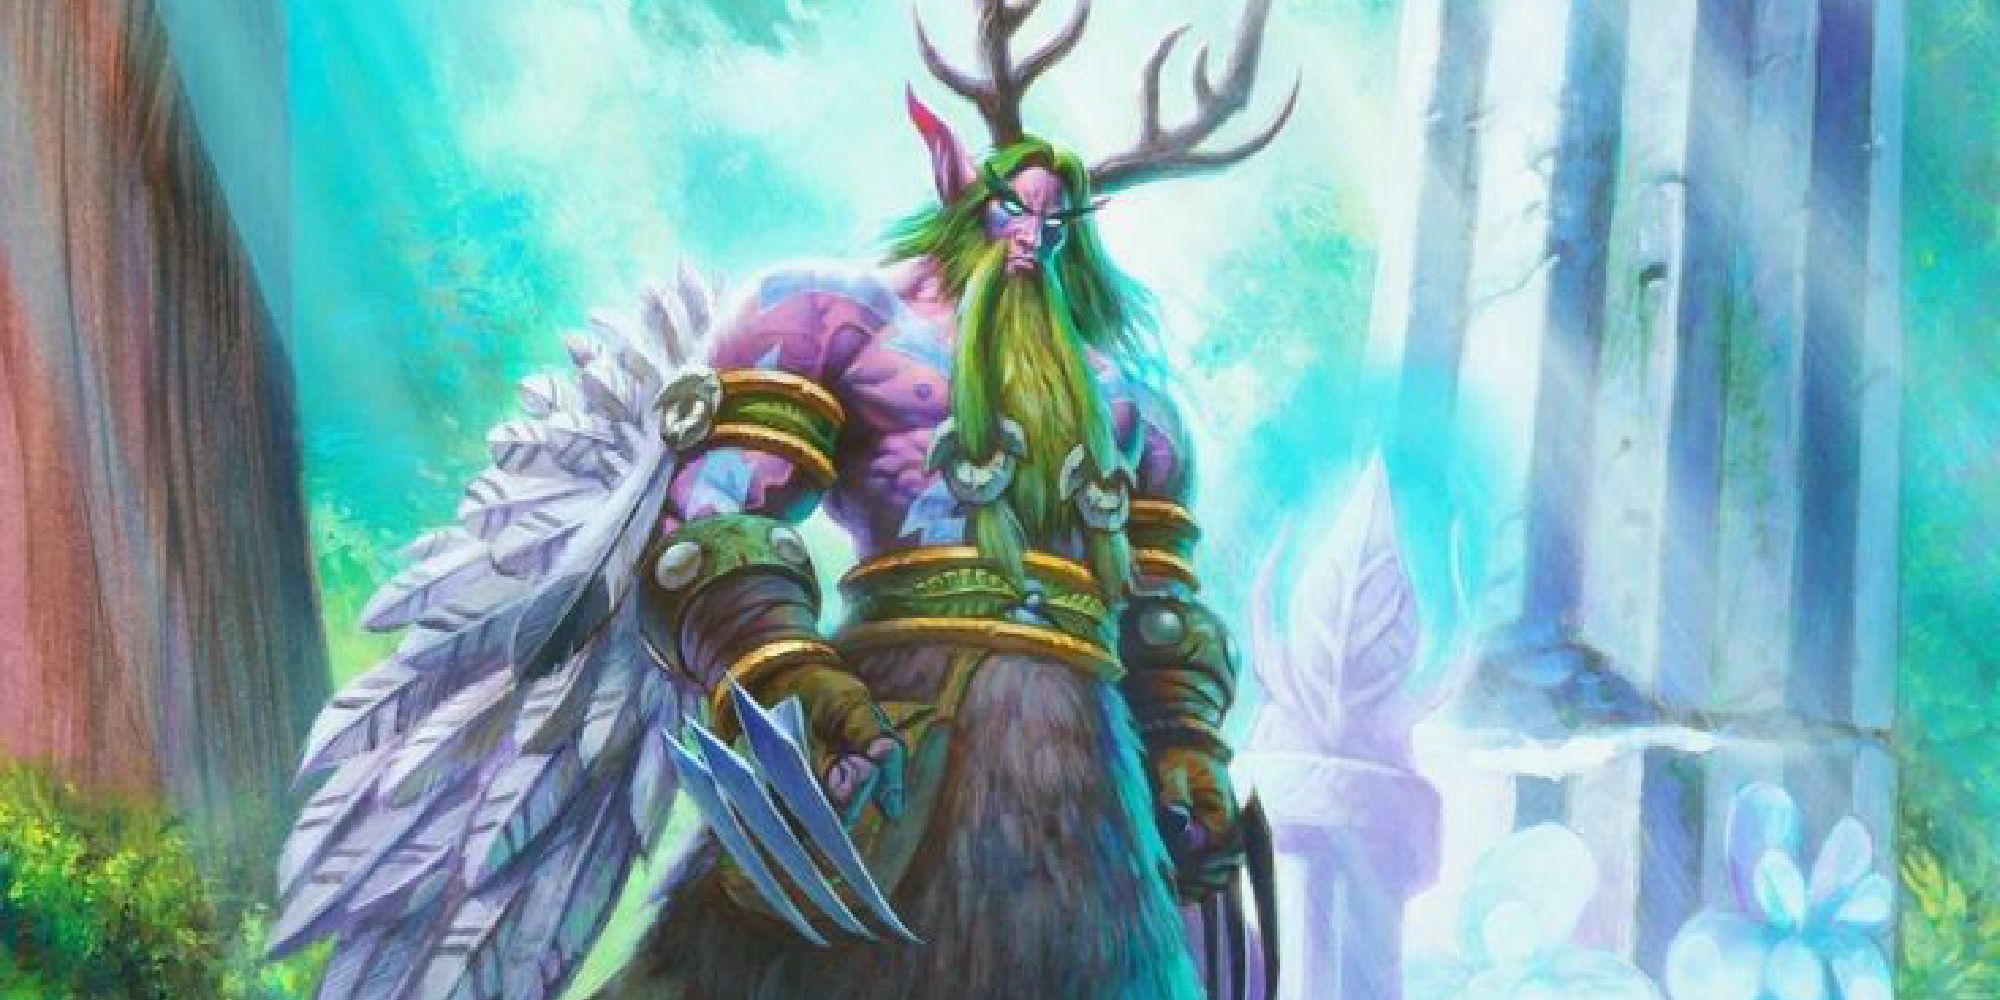 Malfurion Stormrage from WoW in a forest